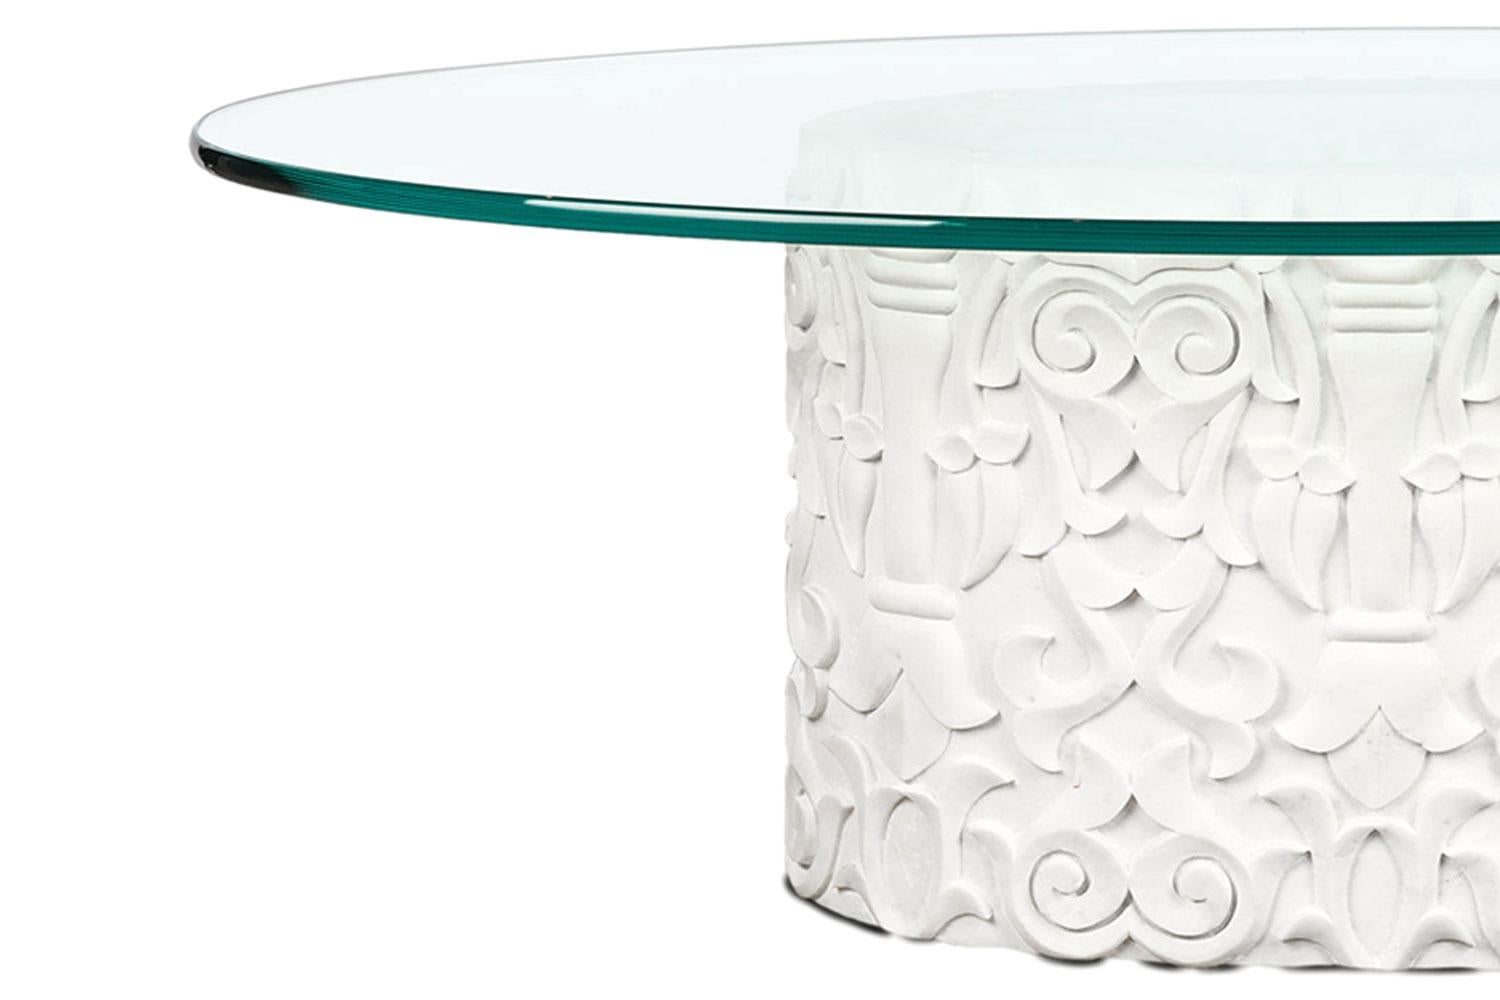 Lotus Hand-Carved Oval marble coffee table + glass top By Stephanie Odegard

This coffee table has an oval glass top and hand-carved marble base and is made in India. A beautiful example of a contemporary design inspired by an ancient culture.